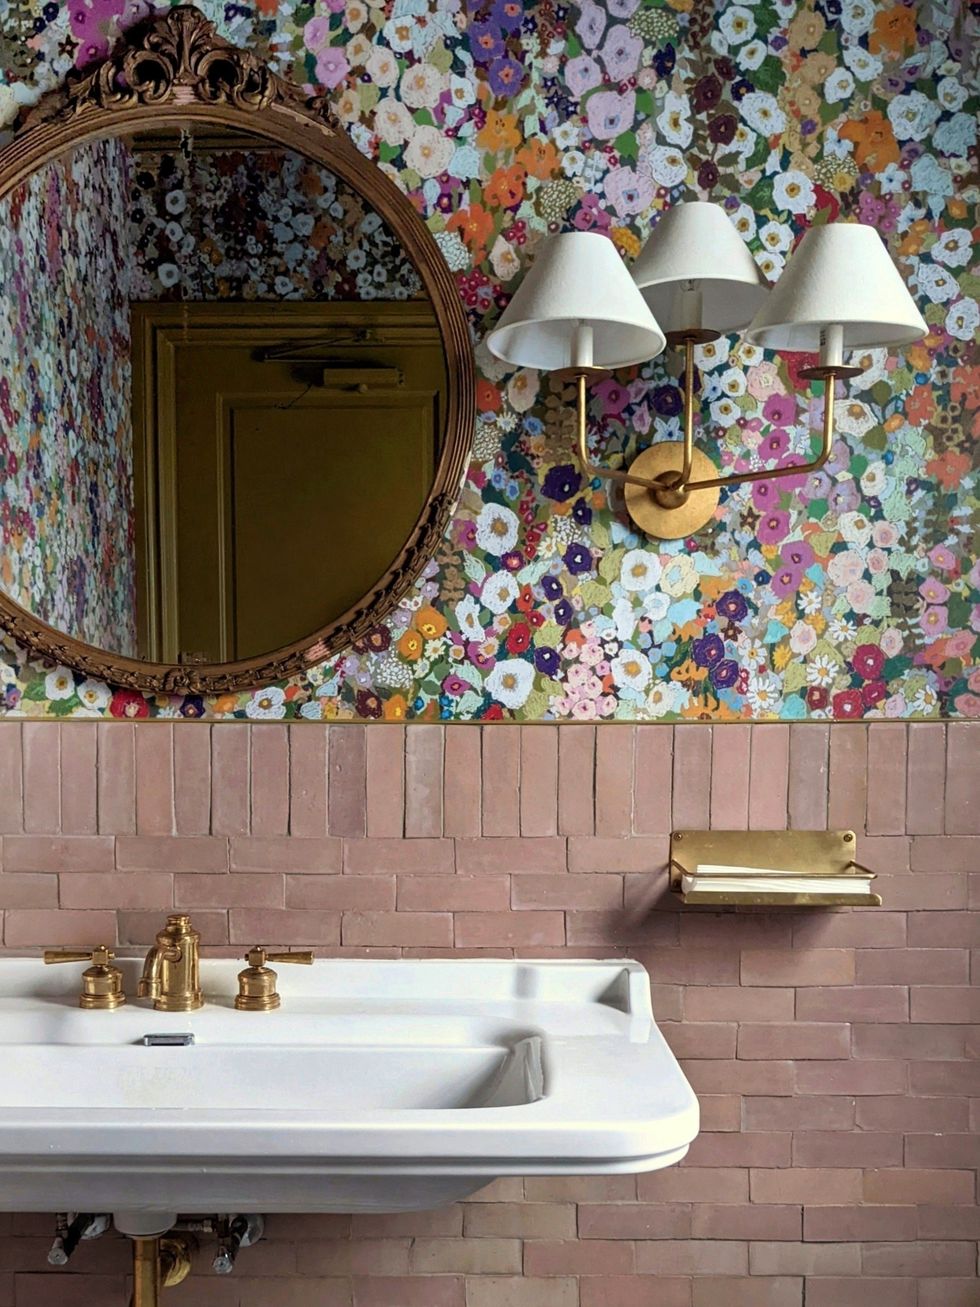 bathroom sink and colorful flowered wallpaper